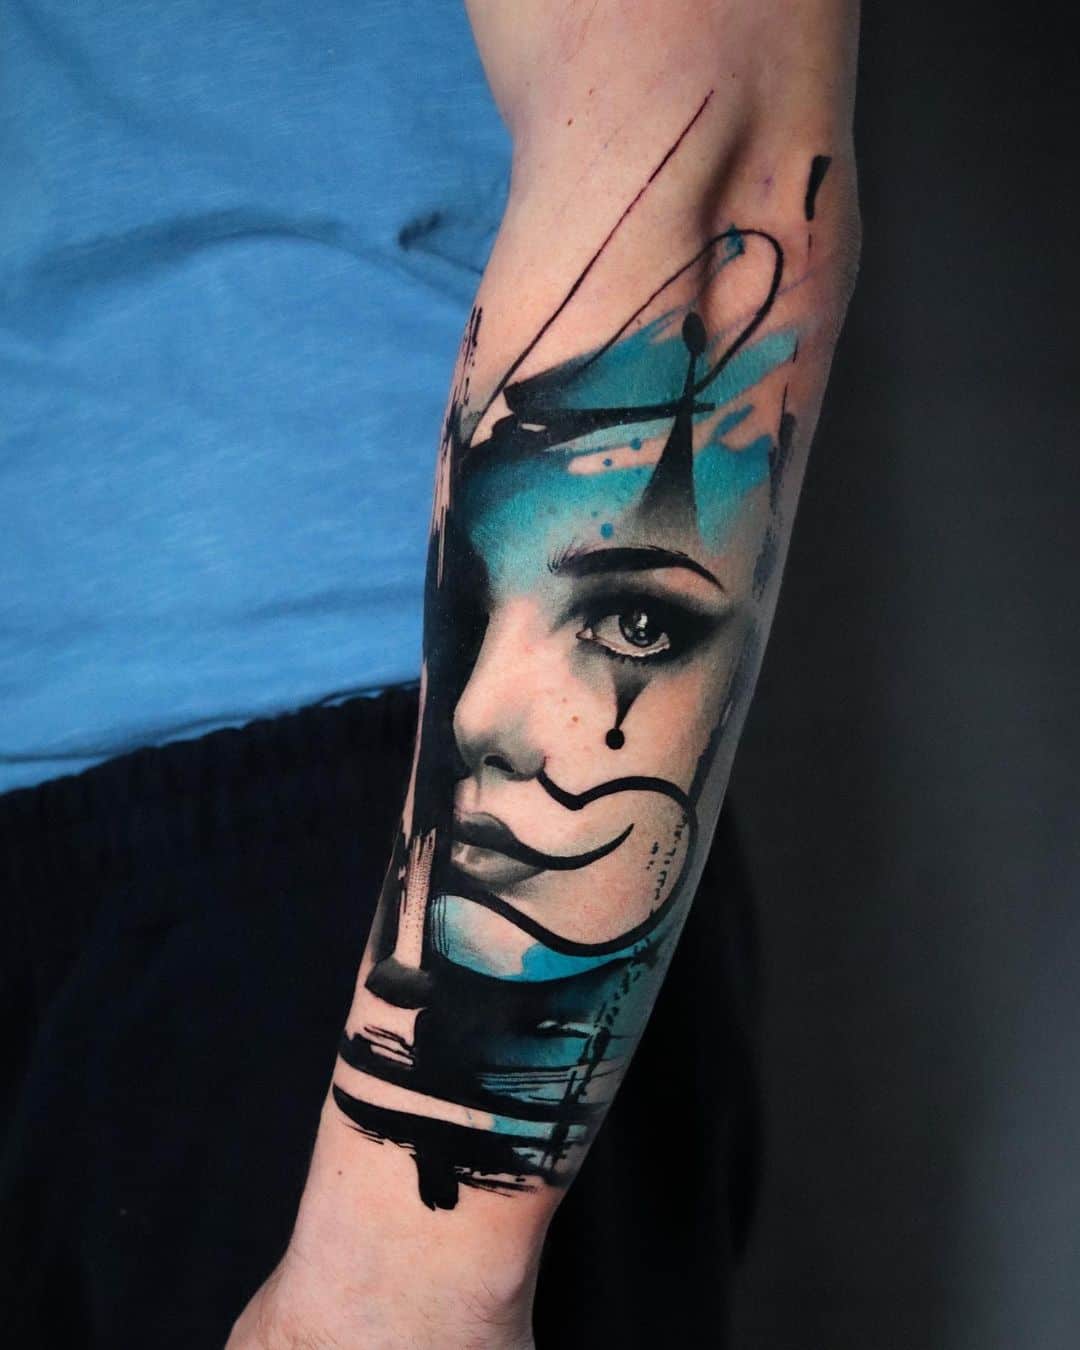 Portrait tattoo by marcoencre